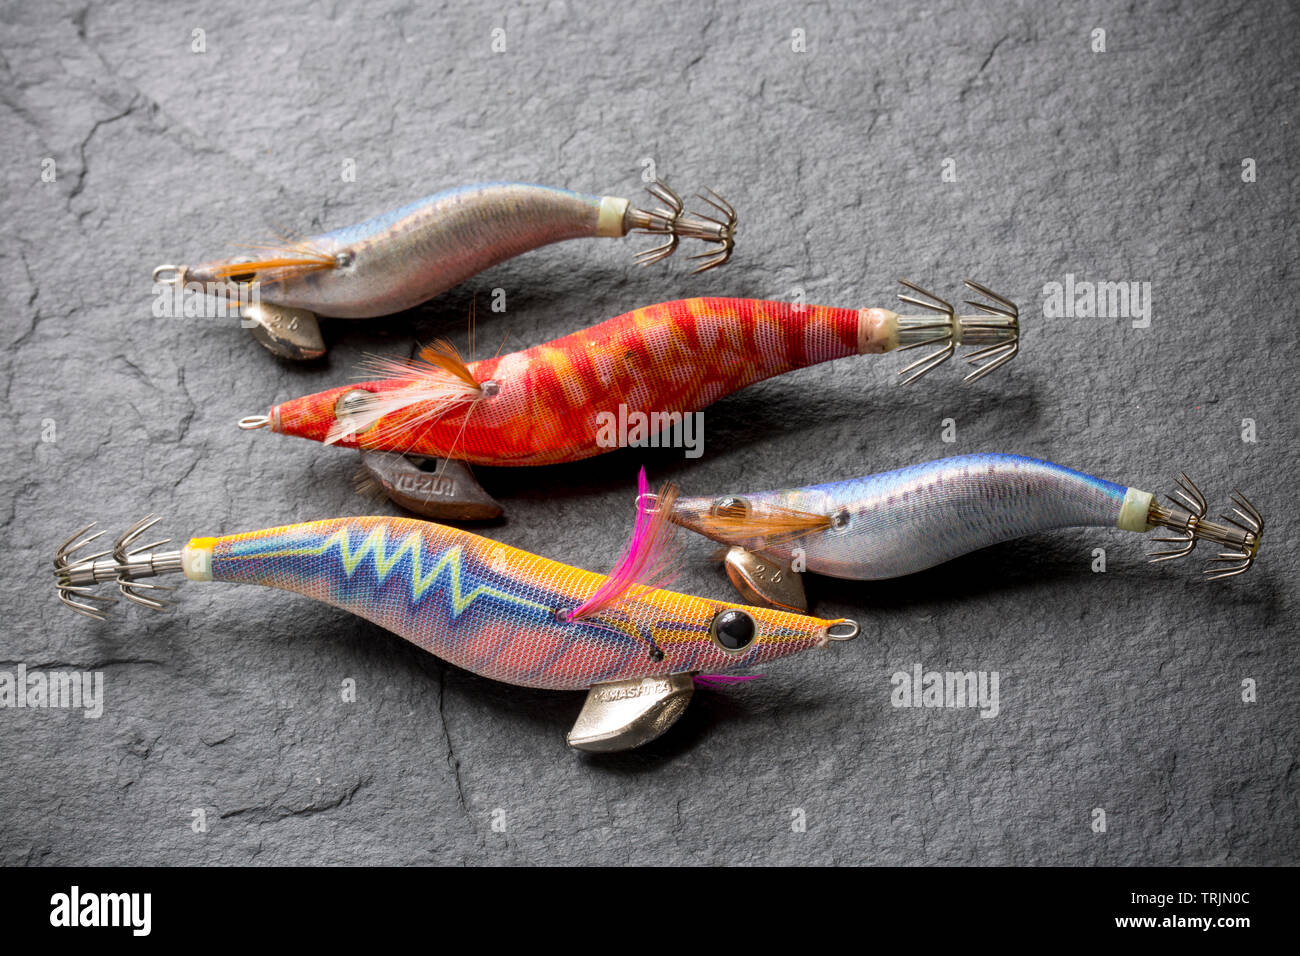 A selection of squid jigs, or lures. Squid fishing has become